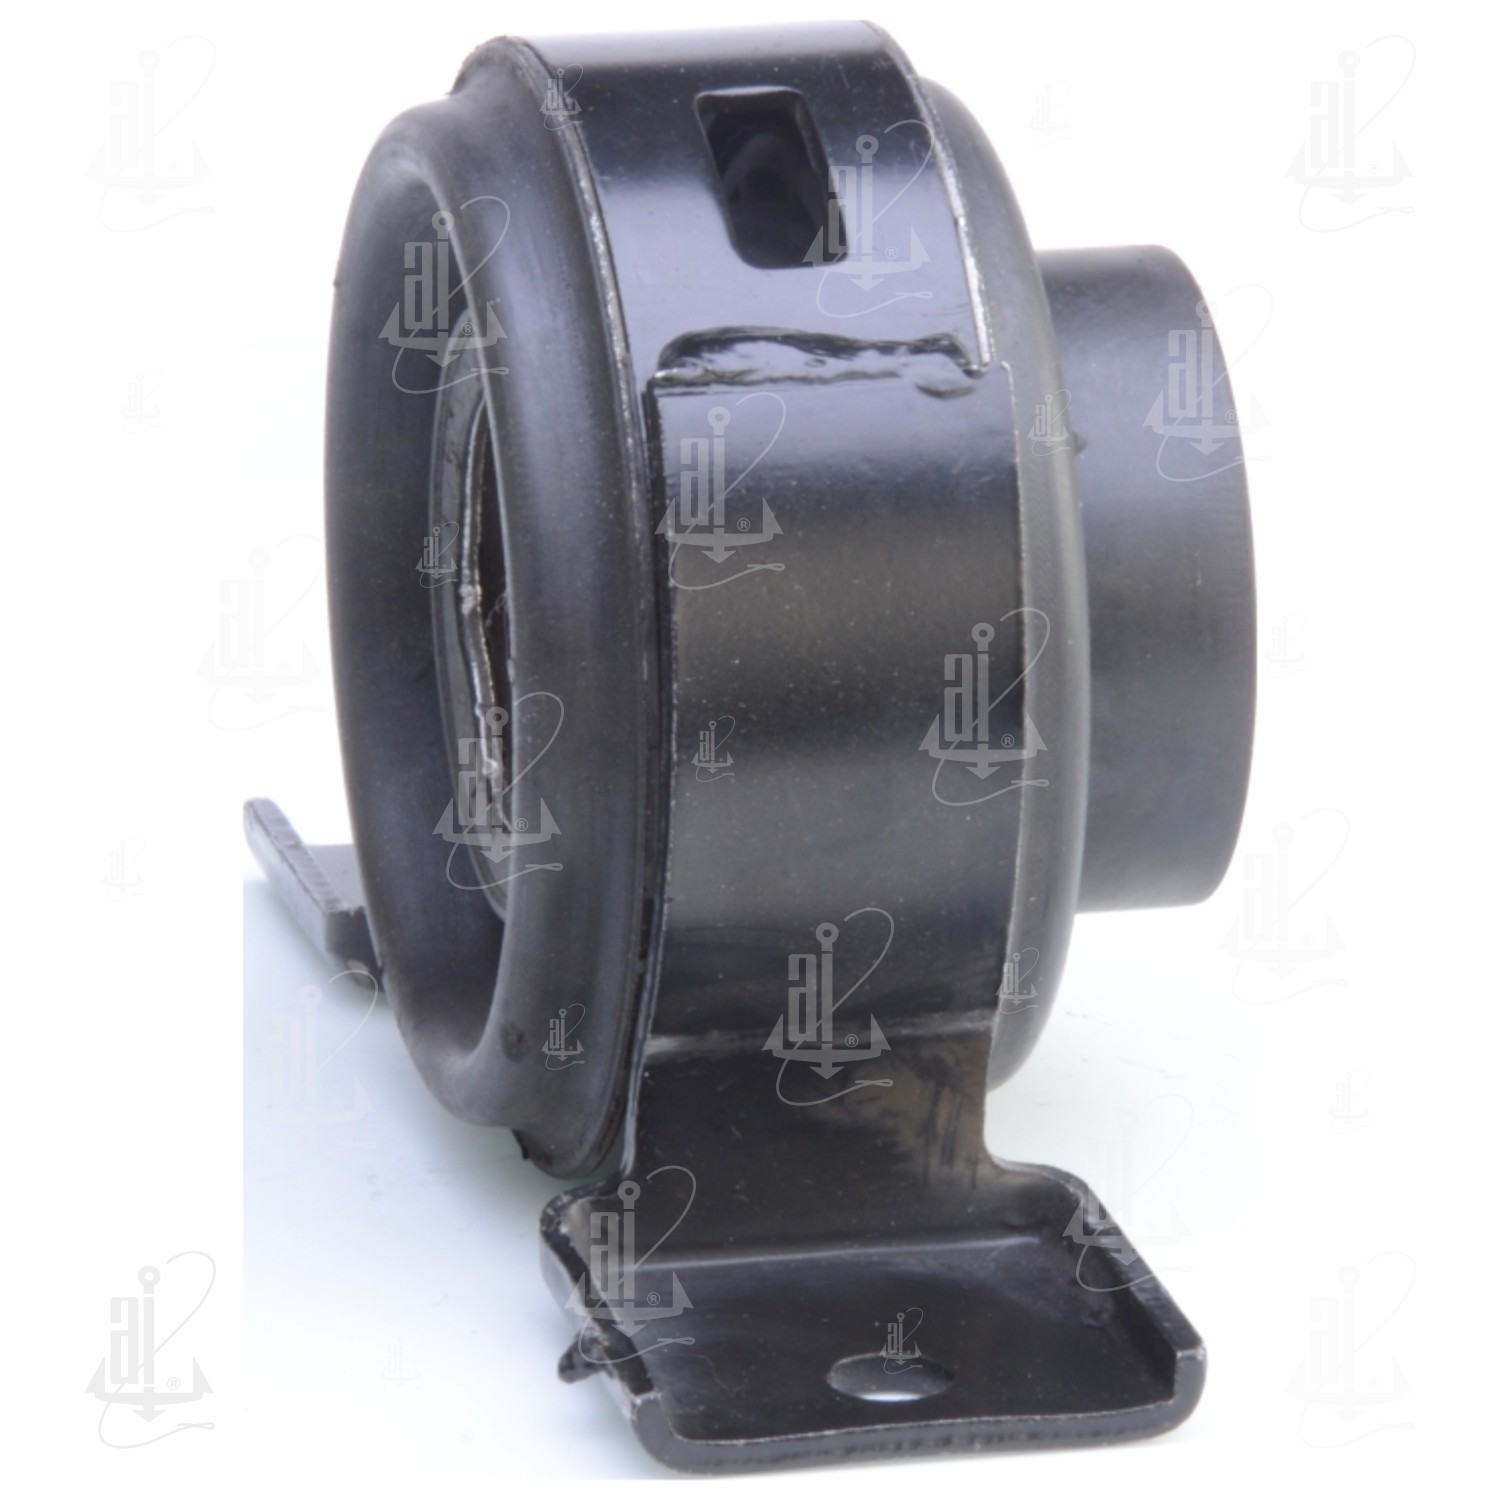 Left View of Center Drive Shaft Center Support Bearing ANCHOR 6109